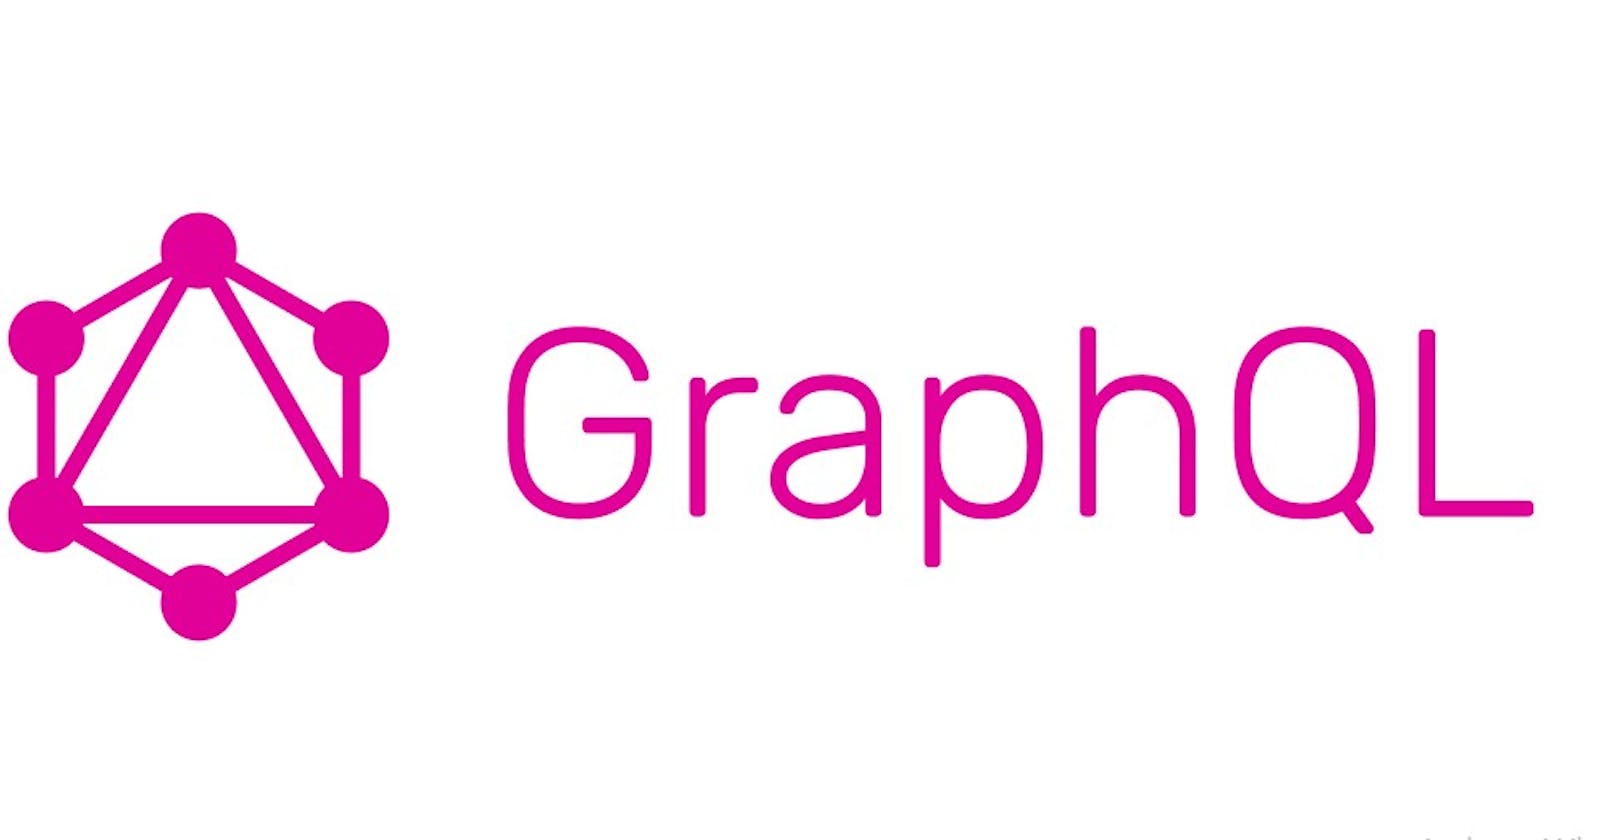 Getting Started With GraphQL & Why it is Required (Part 1)